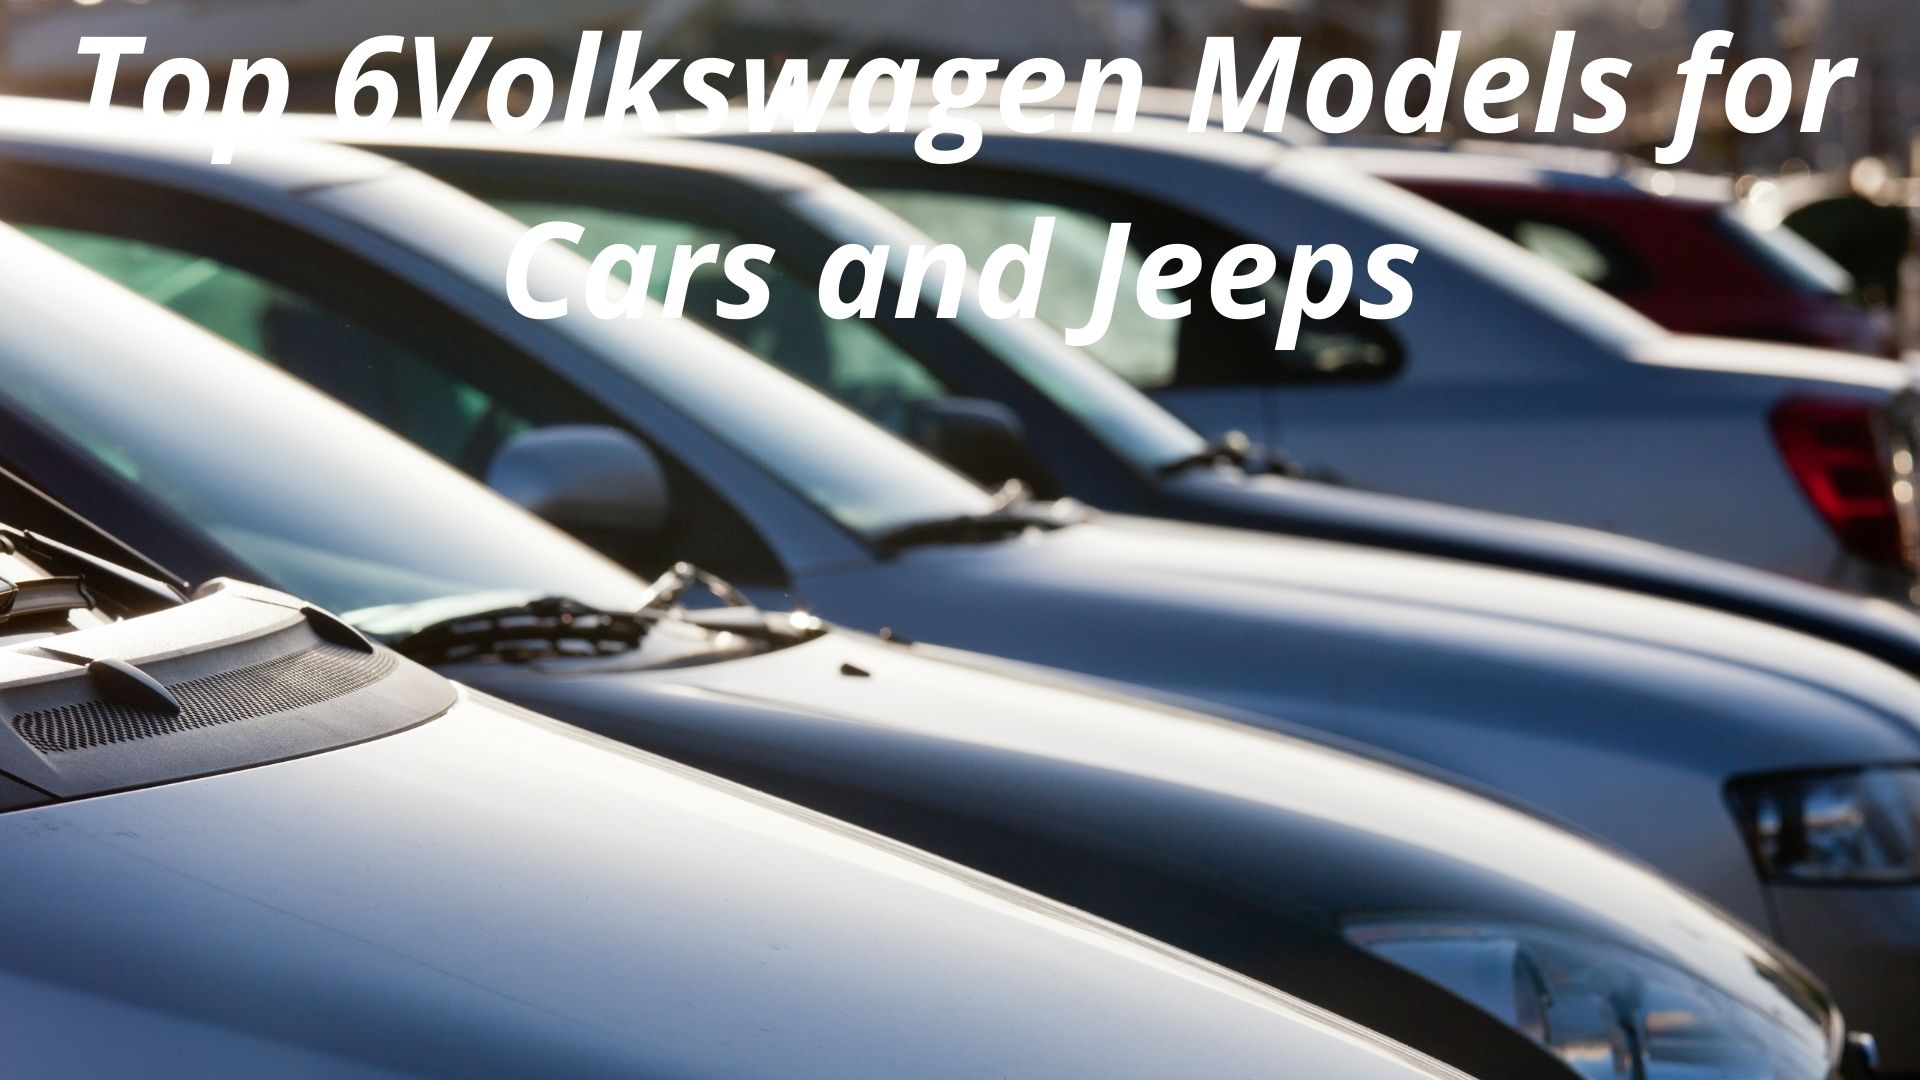 Top 6Volkswagen Models for Cars and Jeeps